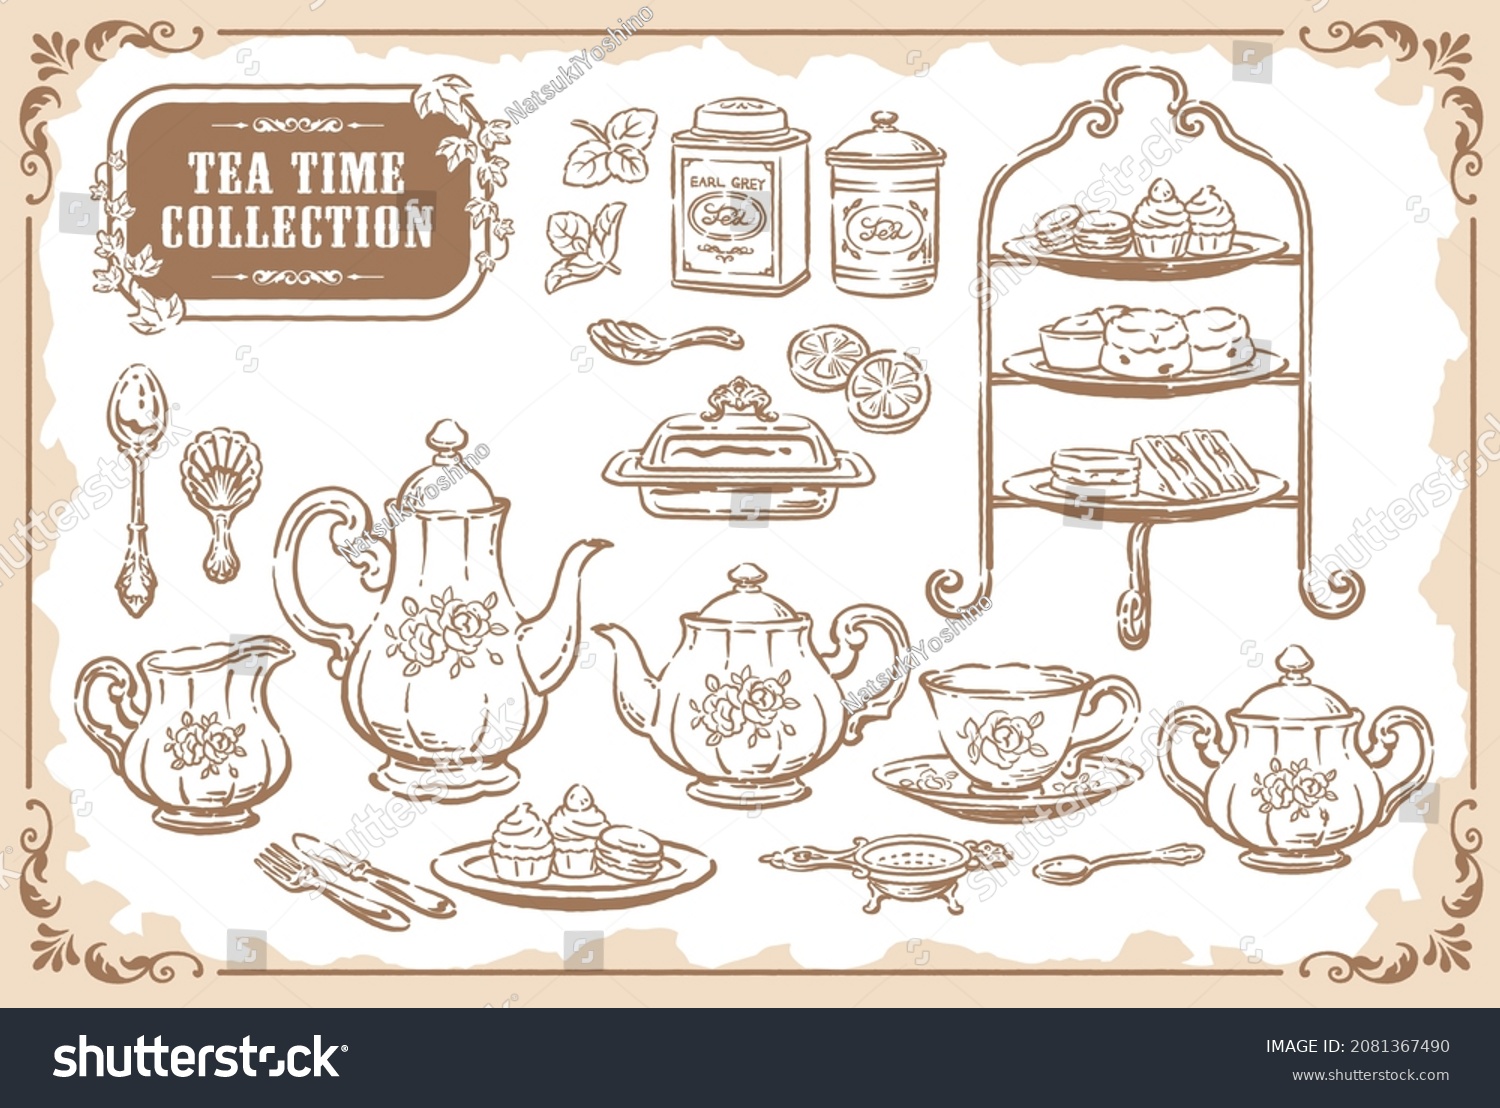 Collection of tea time objects. Vintage tools and pastries. Vector illustration. #2081367490